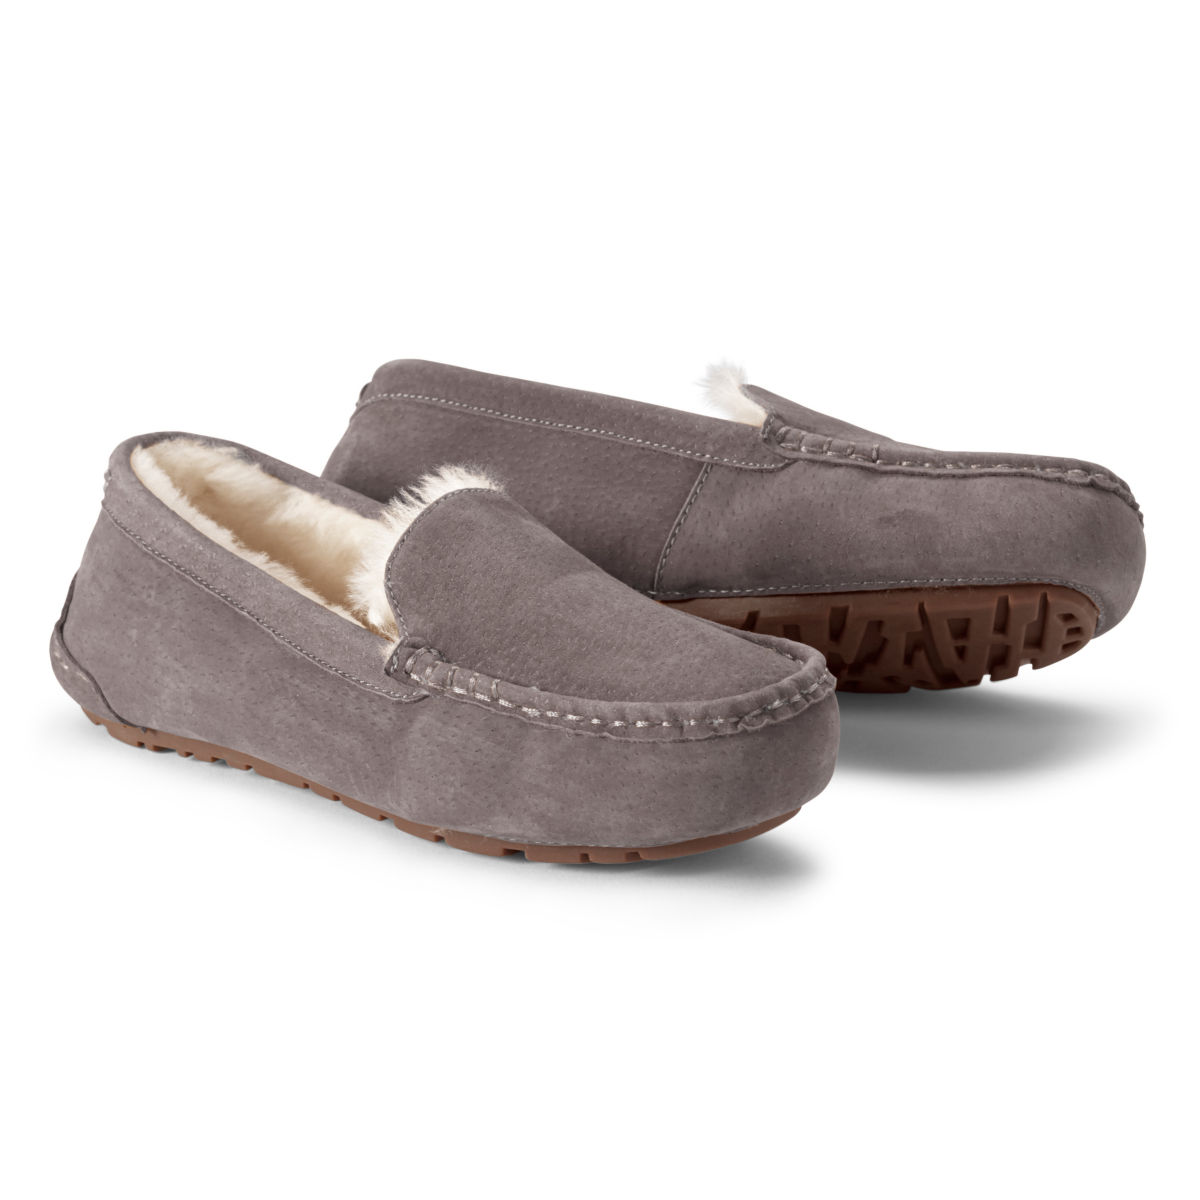 Orvis Lodge Shearling Slippers - DARK GREYimage number 0